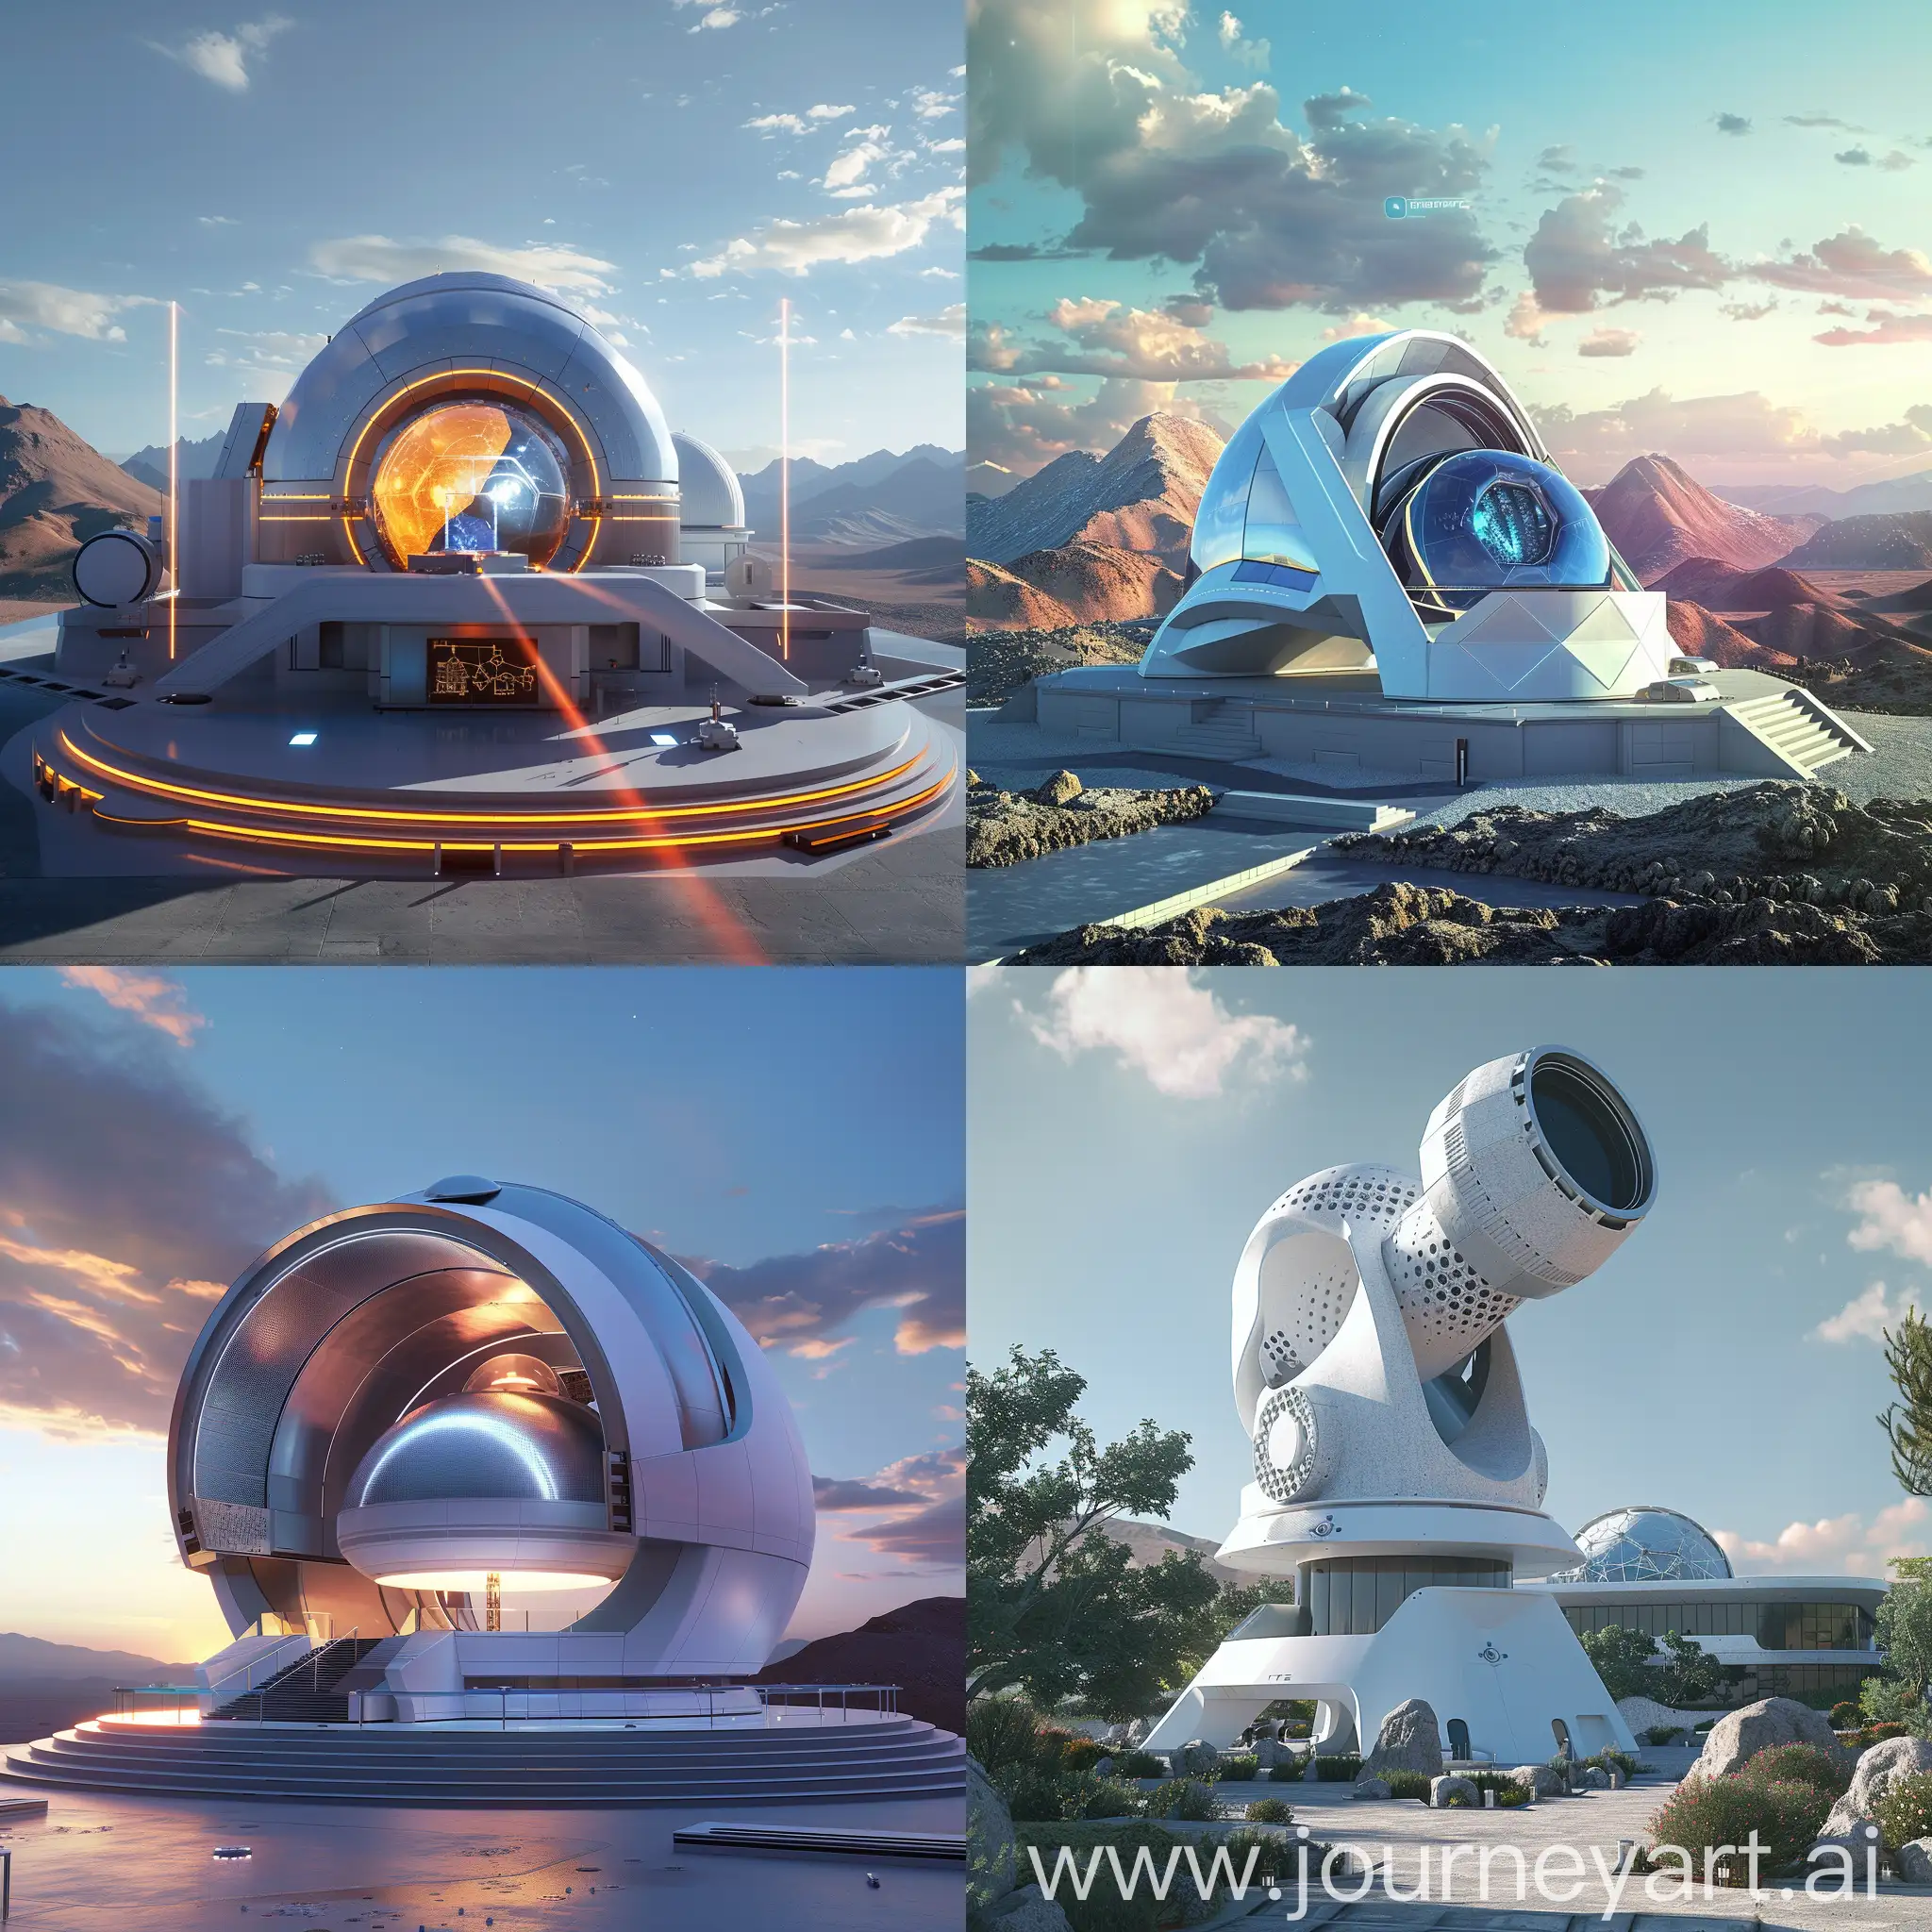 CuttingEdge-Observatory-with-AI-Image-Processing-and-Futuristic-Technology